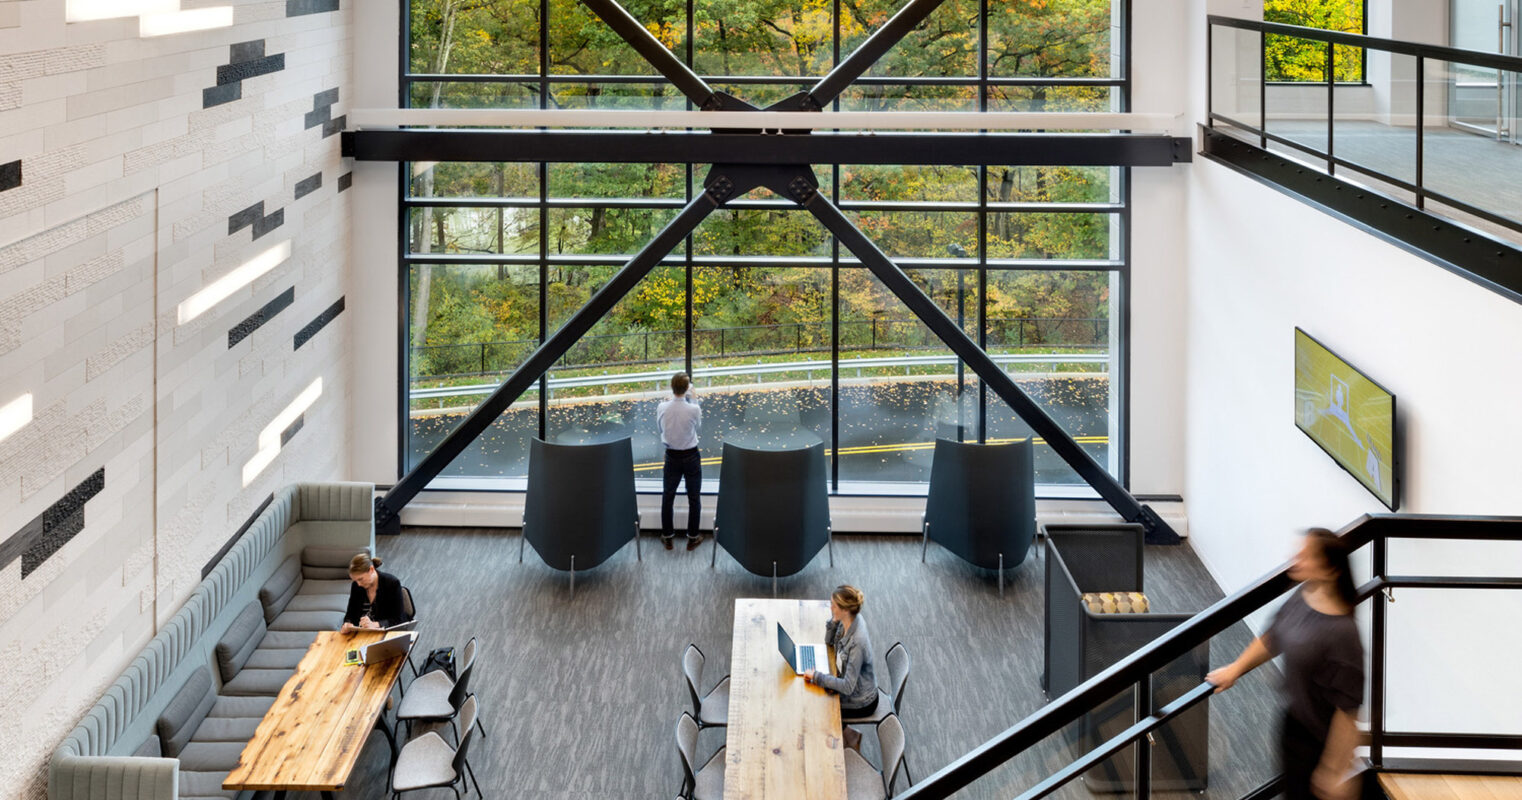 Modern office interior with high ceilings and large picture windows showcasing an autumnal tree panorama. Natural light illuminates the minimalist décor, contrasting the industrial-style black beams and railings. Open-plan seating area features wood tables and gray upholstered benches, fostering a collaborative workspace.